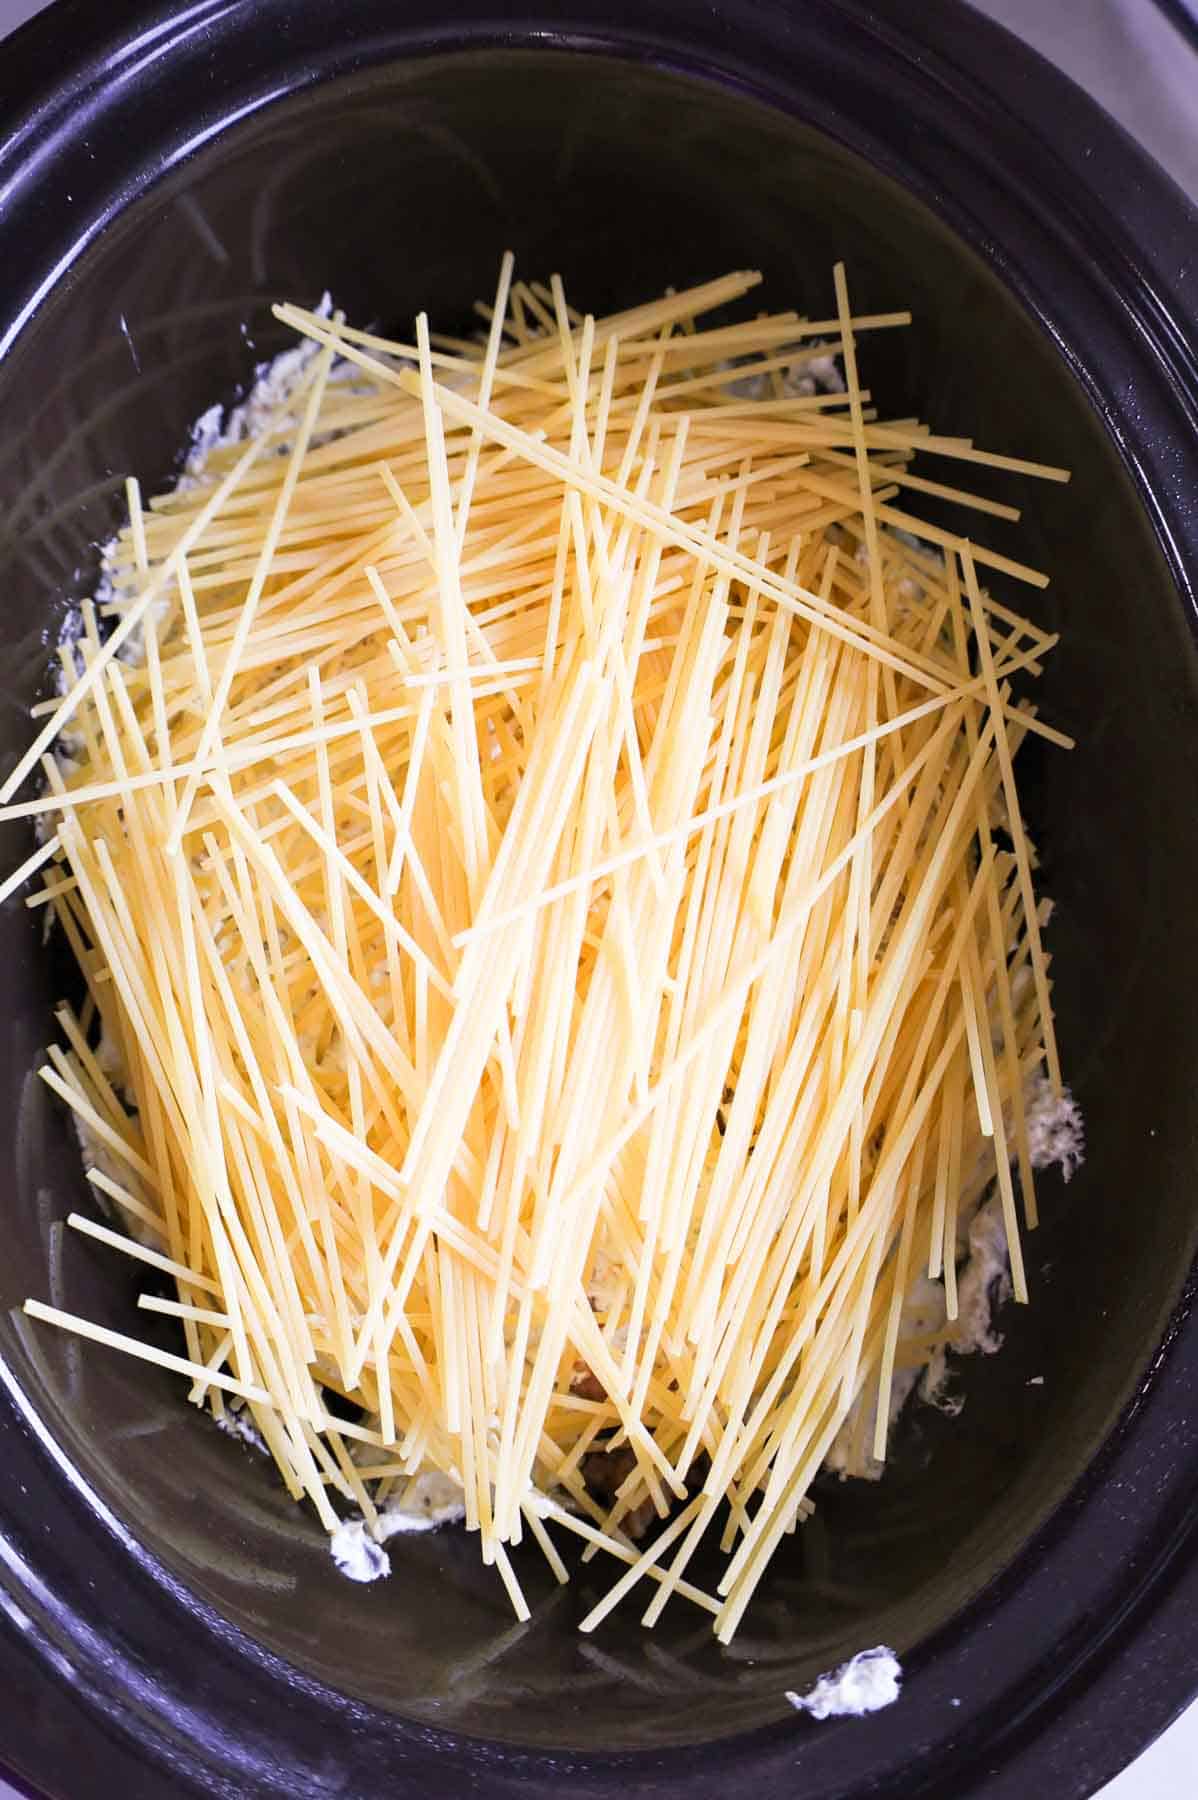 uncooked spaghetti noodles on top of cream cheese mixture in a crock pot